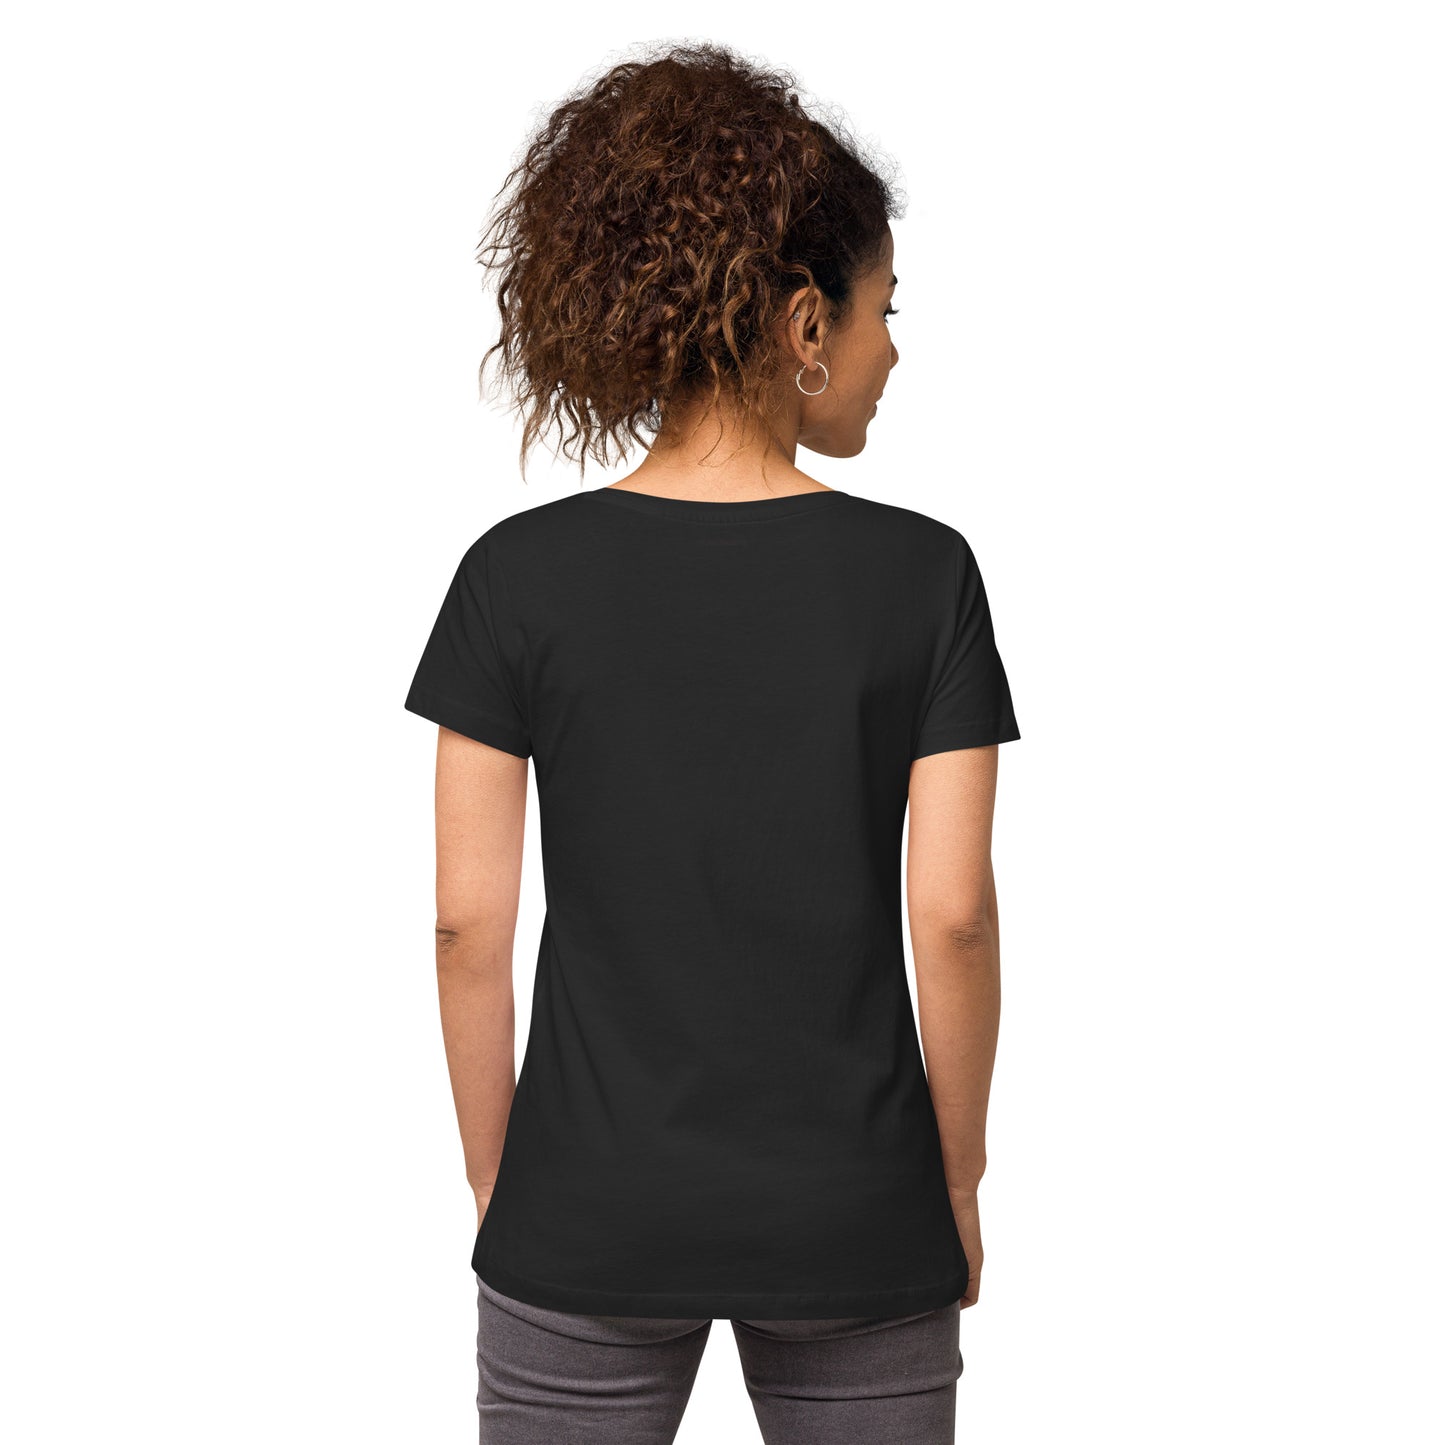 Protect Trans Kids Women’s fitted v-neck t-shirt